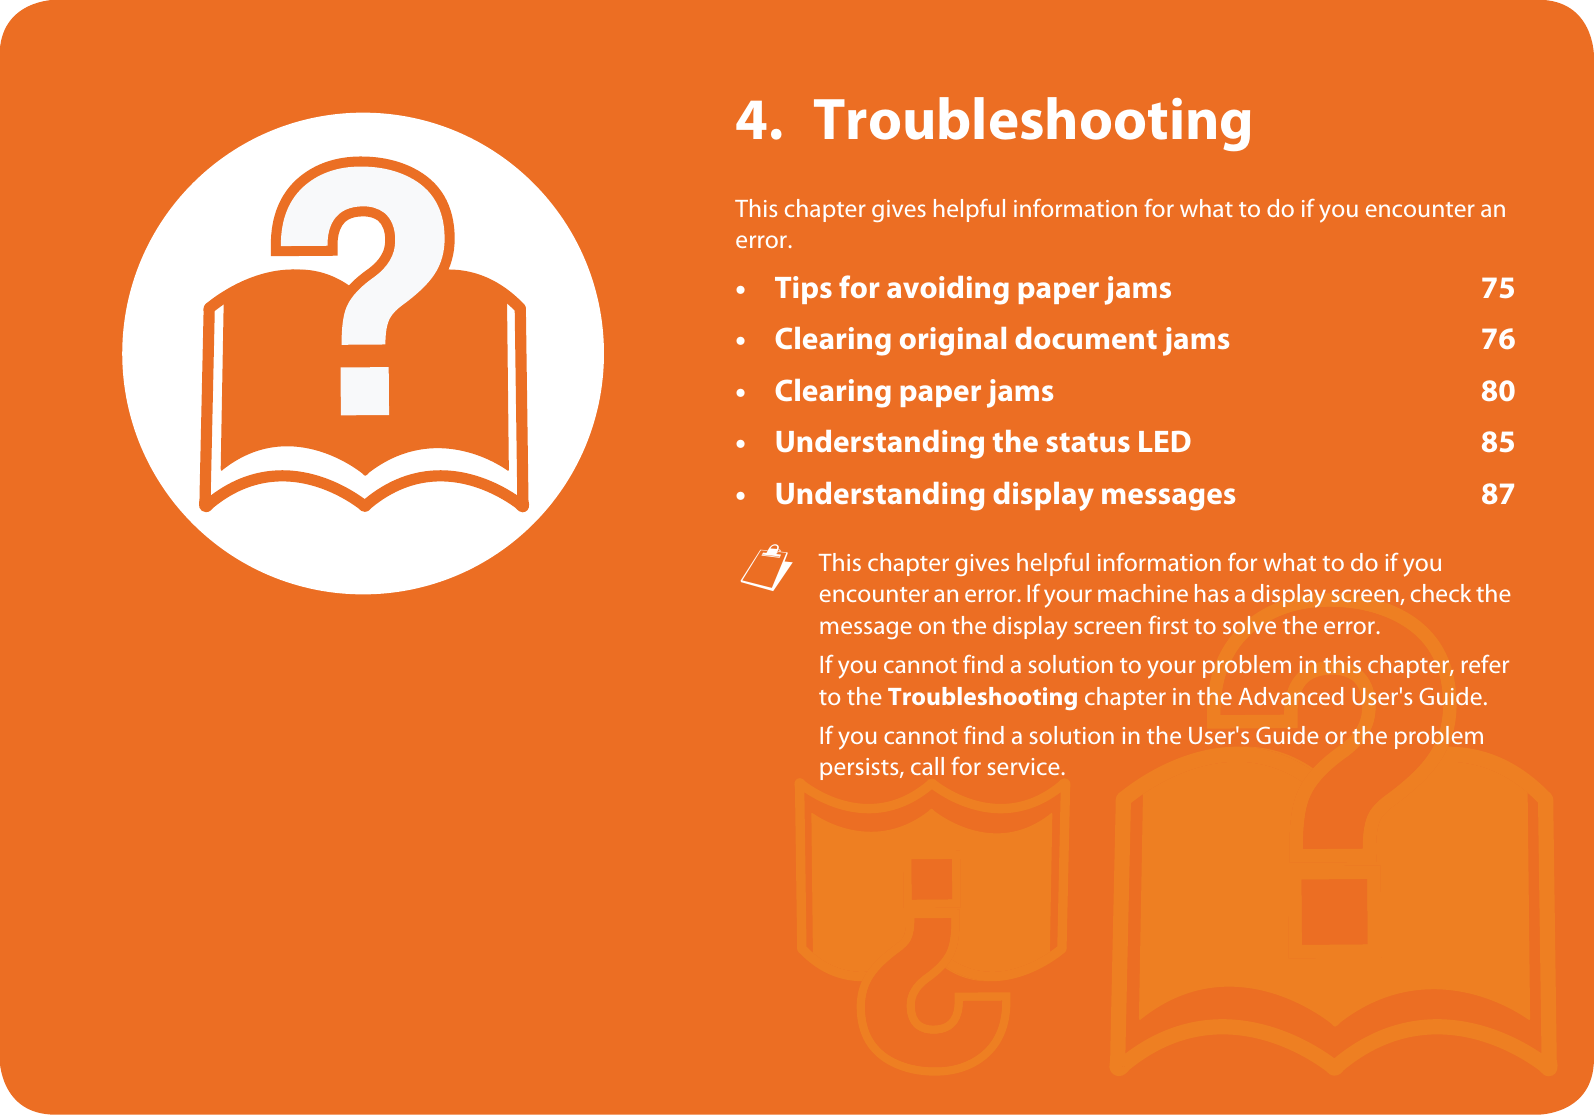 4. TroubleshootingThis chapter gives helpful information for what to do if you encounter an error.• Tips for avoiding paper jams 75• Clearing original document jams 76• Clearing paper jams 80• Understanding the status LED 85• Understanding display messages 87 This chapter gives helpful information for what to do if you encounter an error. If your machine has a display screen, check the message on the display screen first to solve the error.If you cannot find a solution to your problem in this chapter, refer to the Troubleshooting chapter in the Advanced User&apos;s Guide.If you cannot find a solution in the User&apos;s Guide or the problem persists, call for service. 